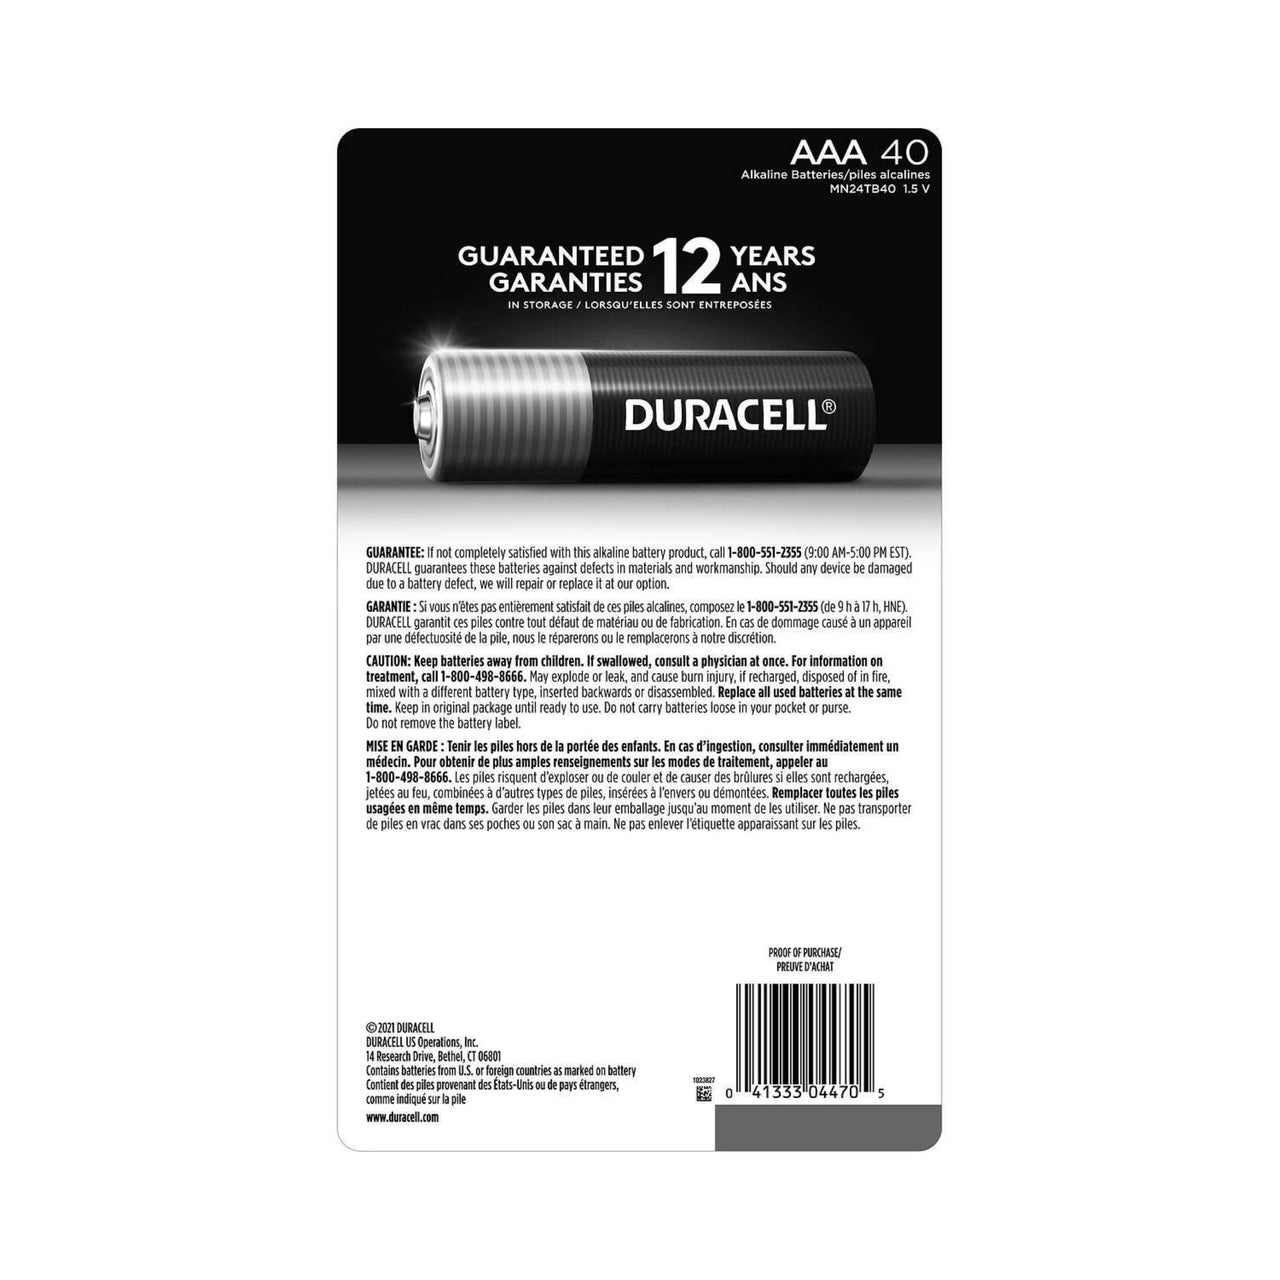 Image of Duracell CopperTop AAA Batteries with PowerBoost Ingredients, 30 count